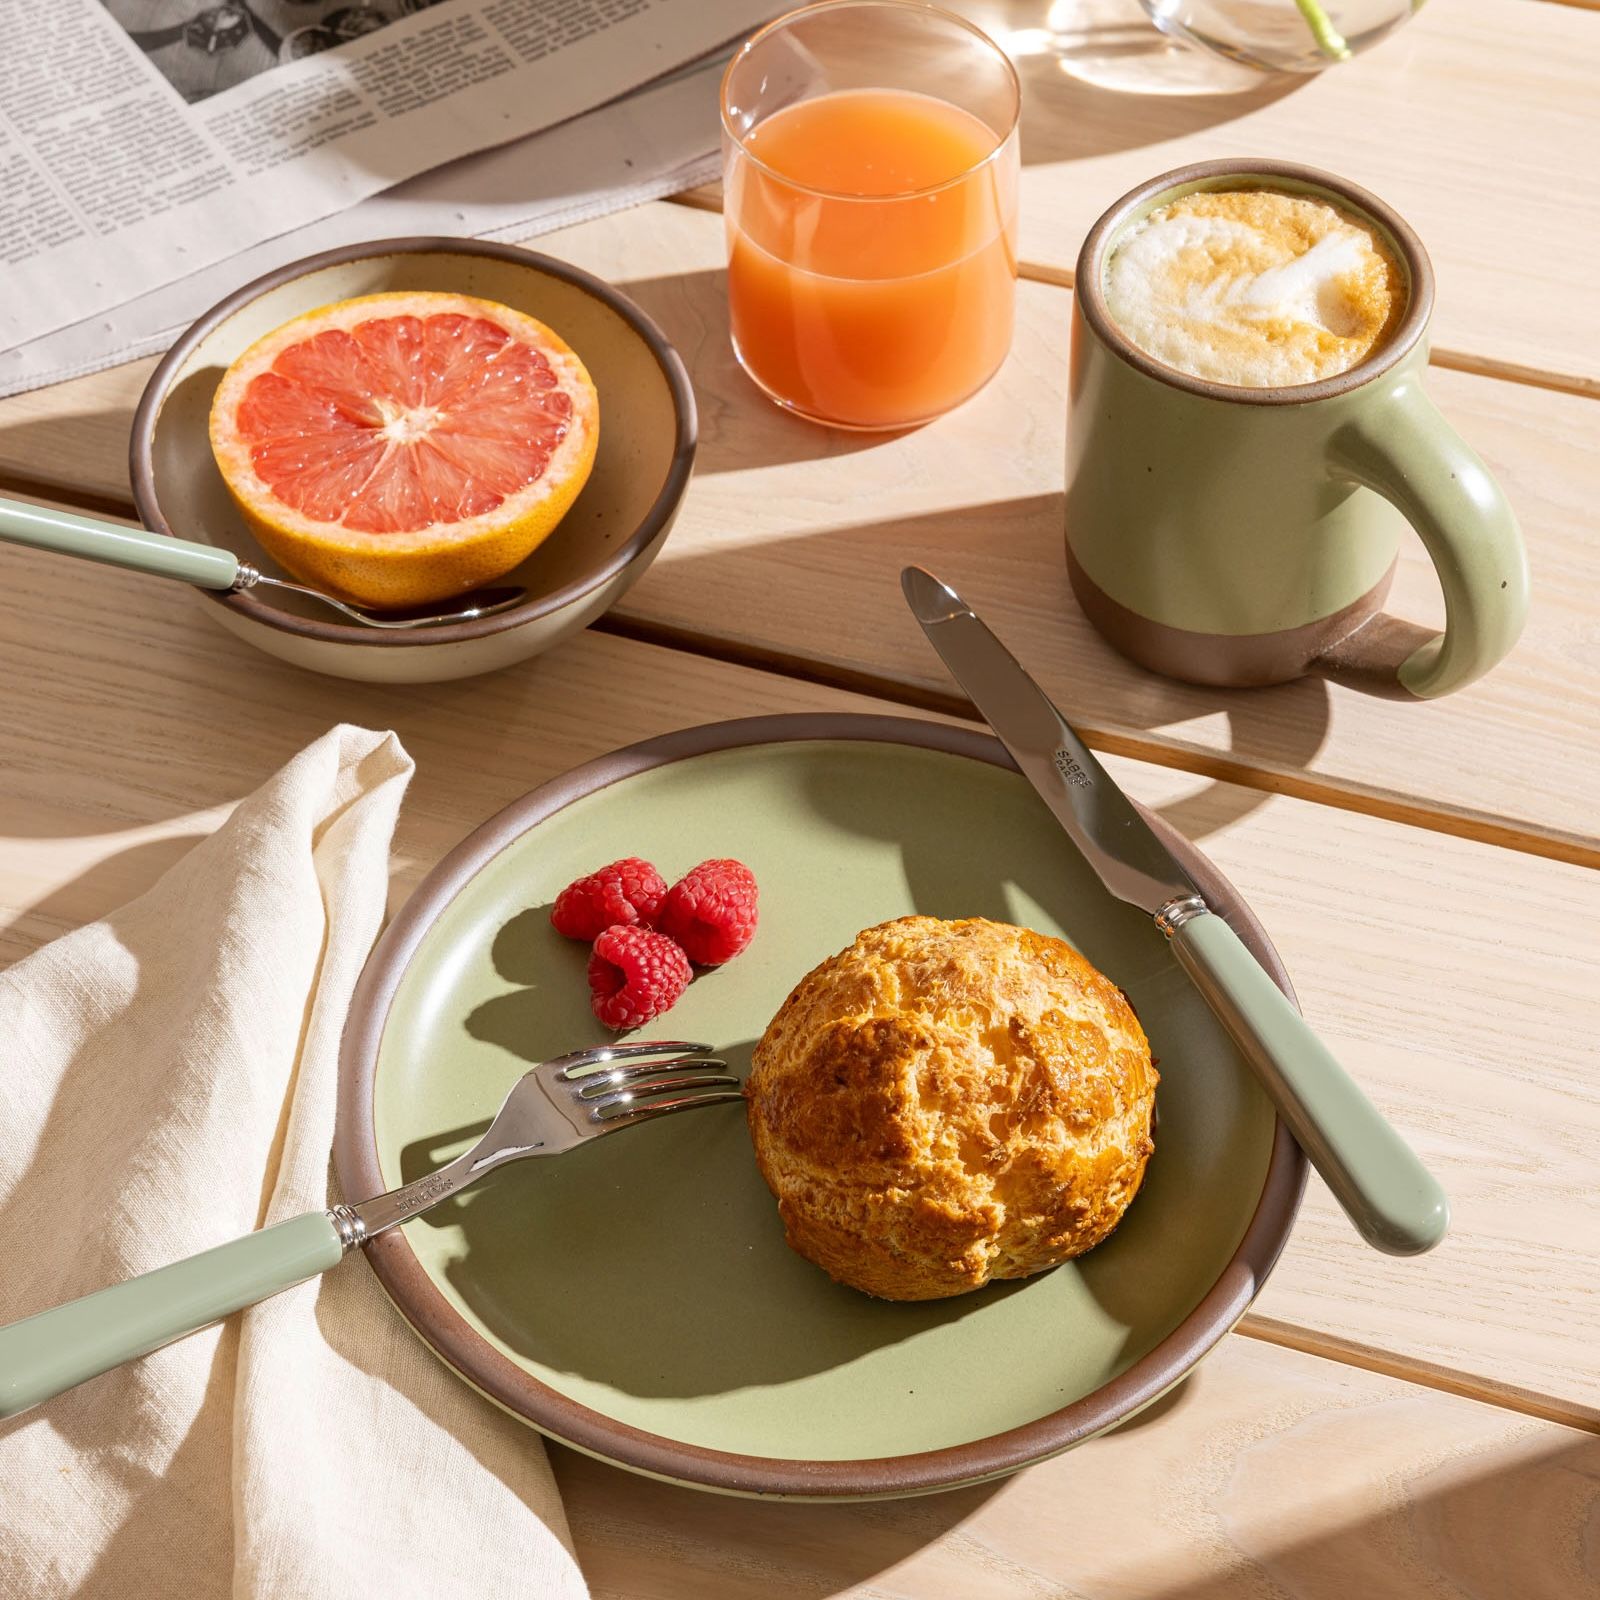 On a breakfast table, there are a ceramic plate, bowl, and mug - all in a sage green. The bowl has grapefruit, the plate has a pastry and berries, and the mug has coffee. Surrounding are a newspaper, sage green flatware, and a natural colored napkin.